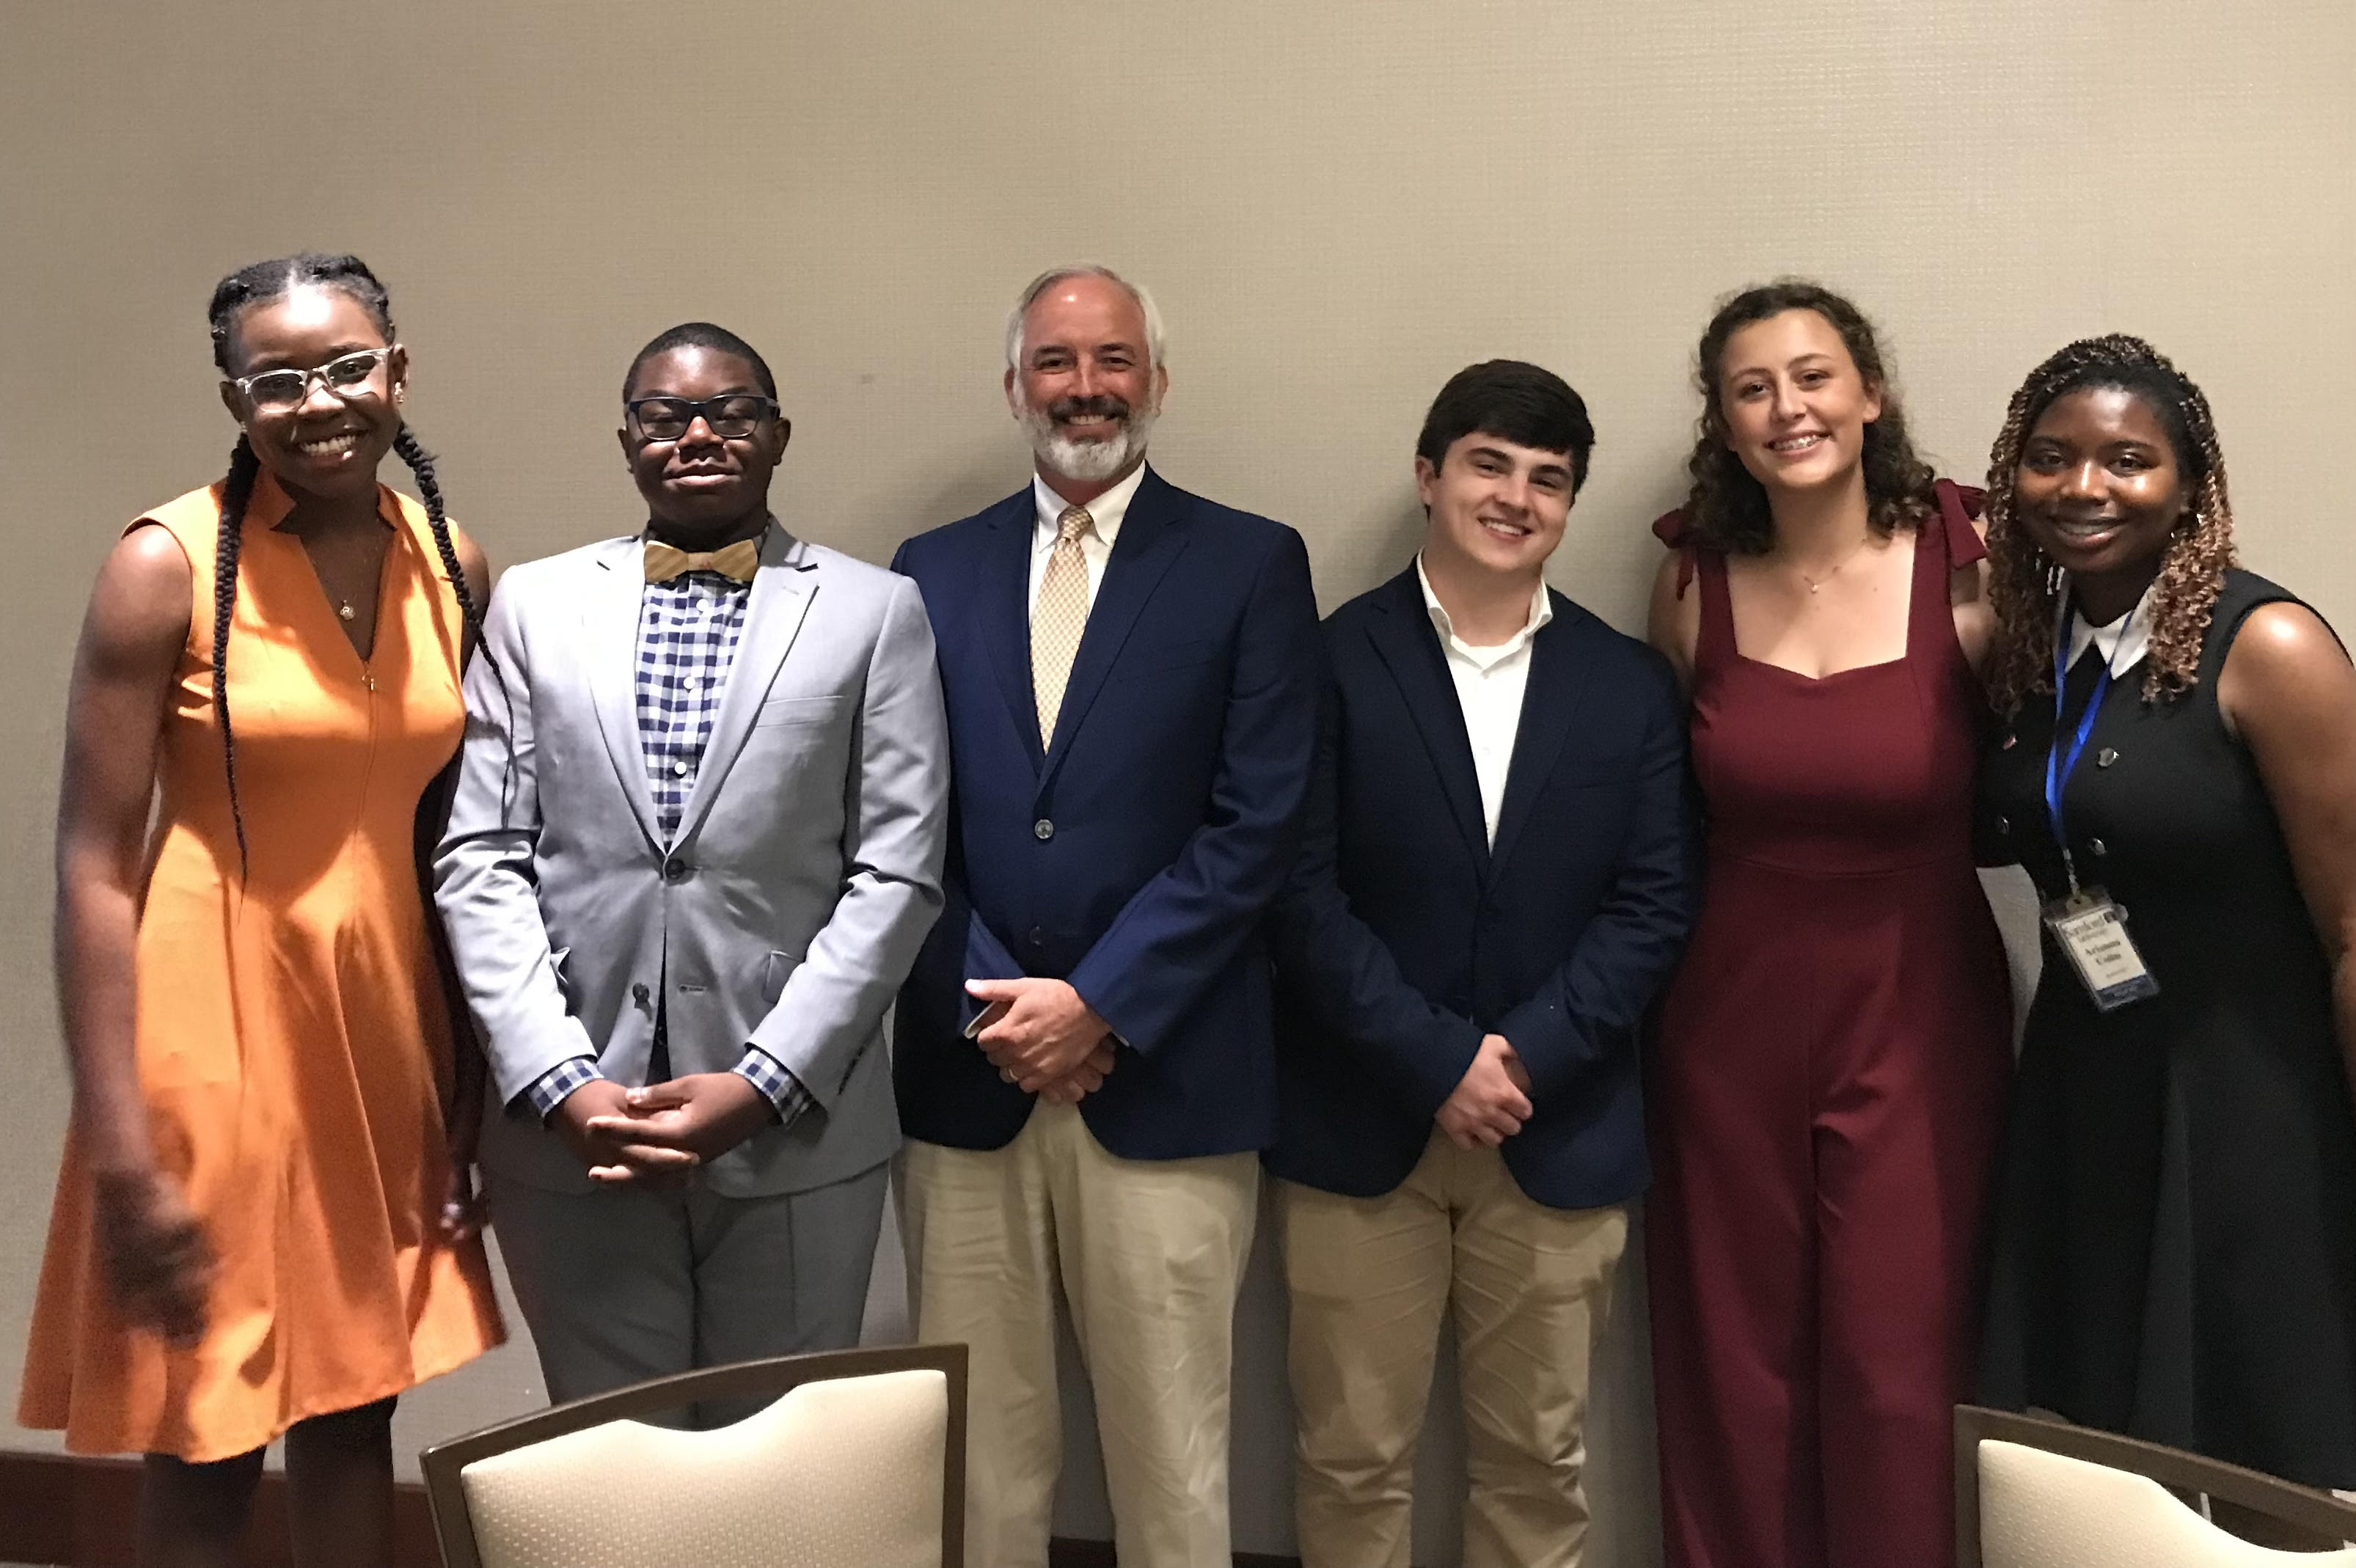 Jim Noles with some of the students of the Alabama Governor’s School